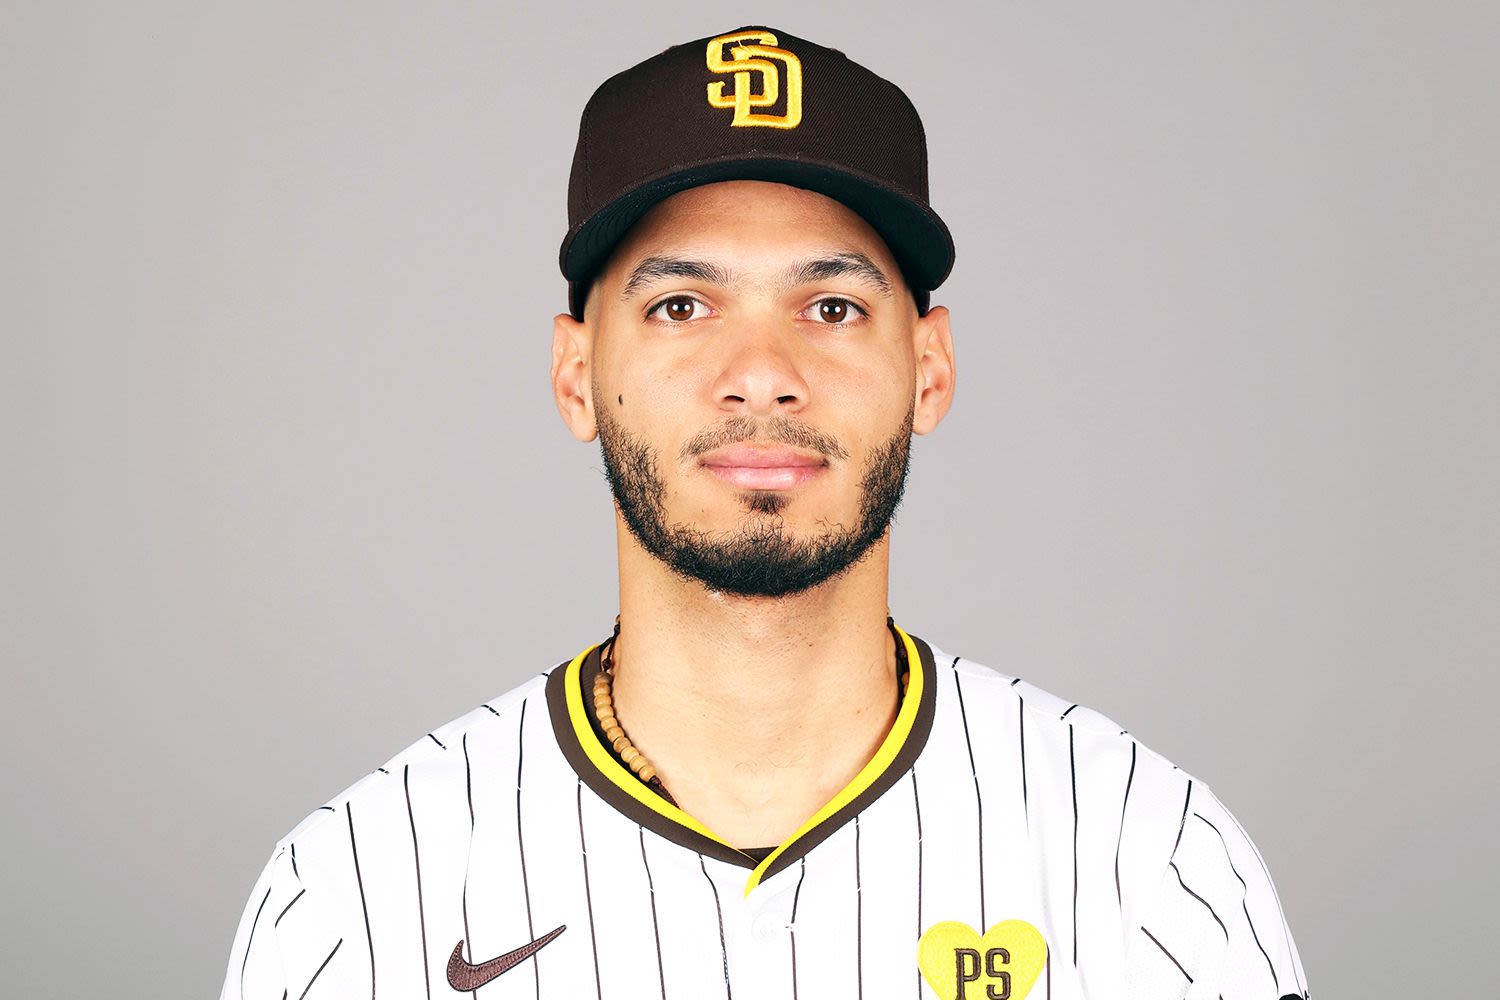 Padres’ Tucupita Marcano Gets Lifetime Ban for Betting on Baseball, 4 Other Players Get 1-Year Suspensions